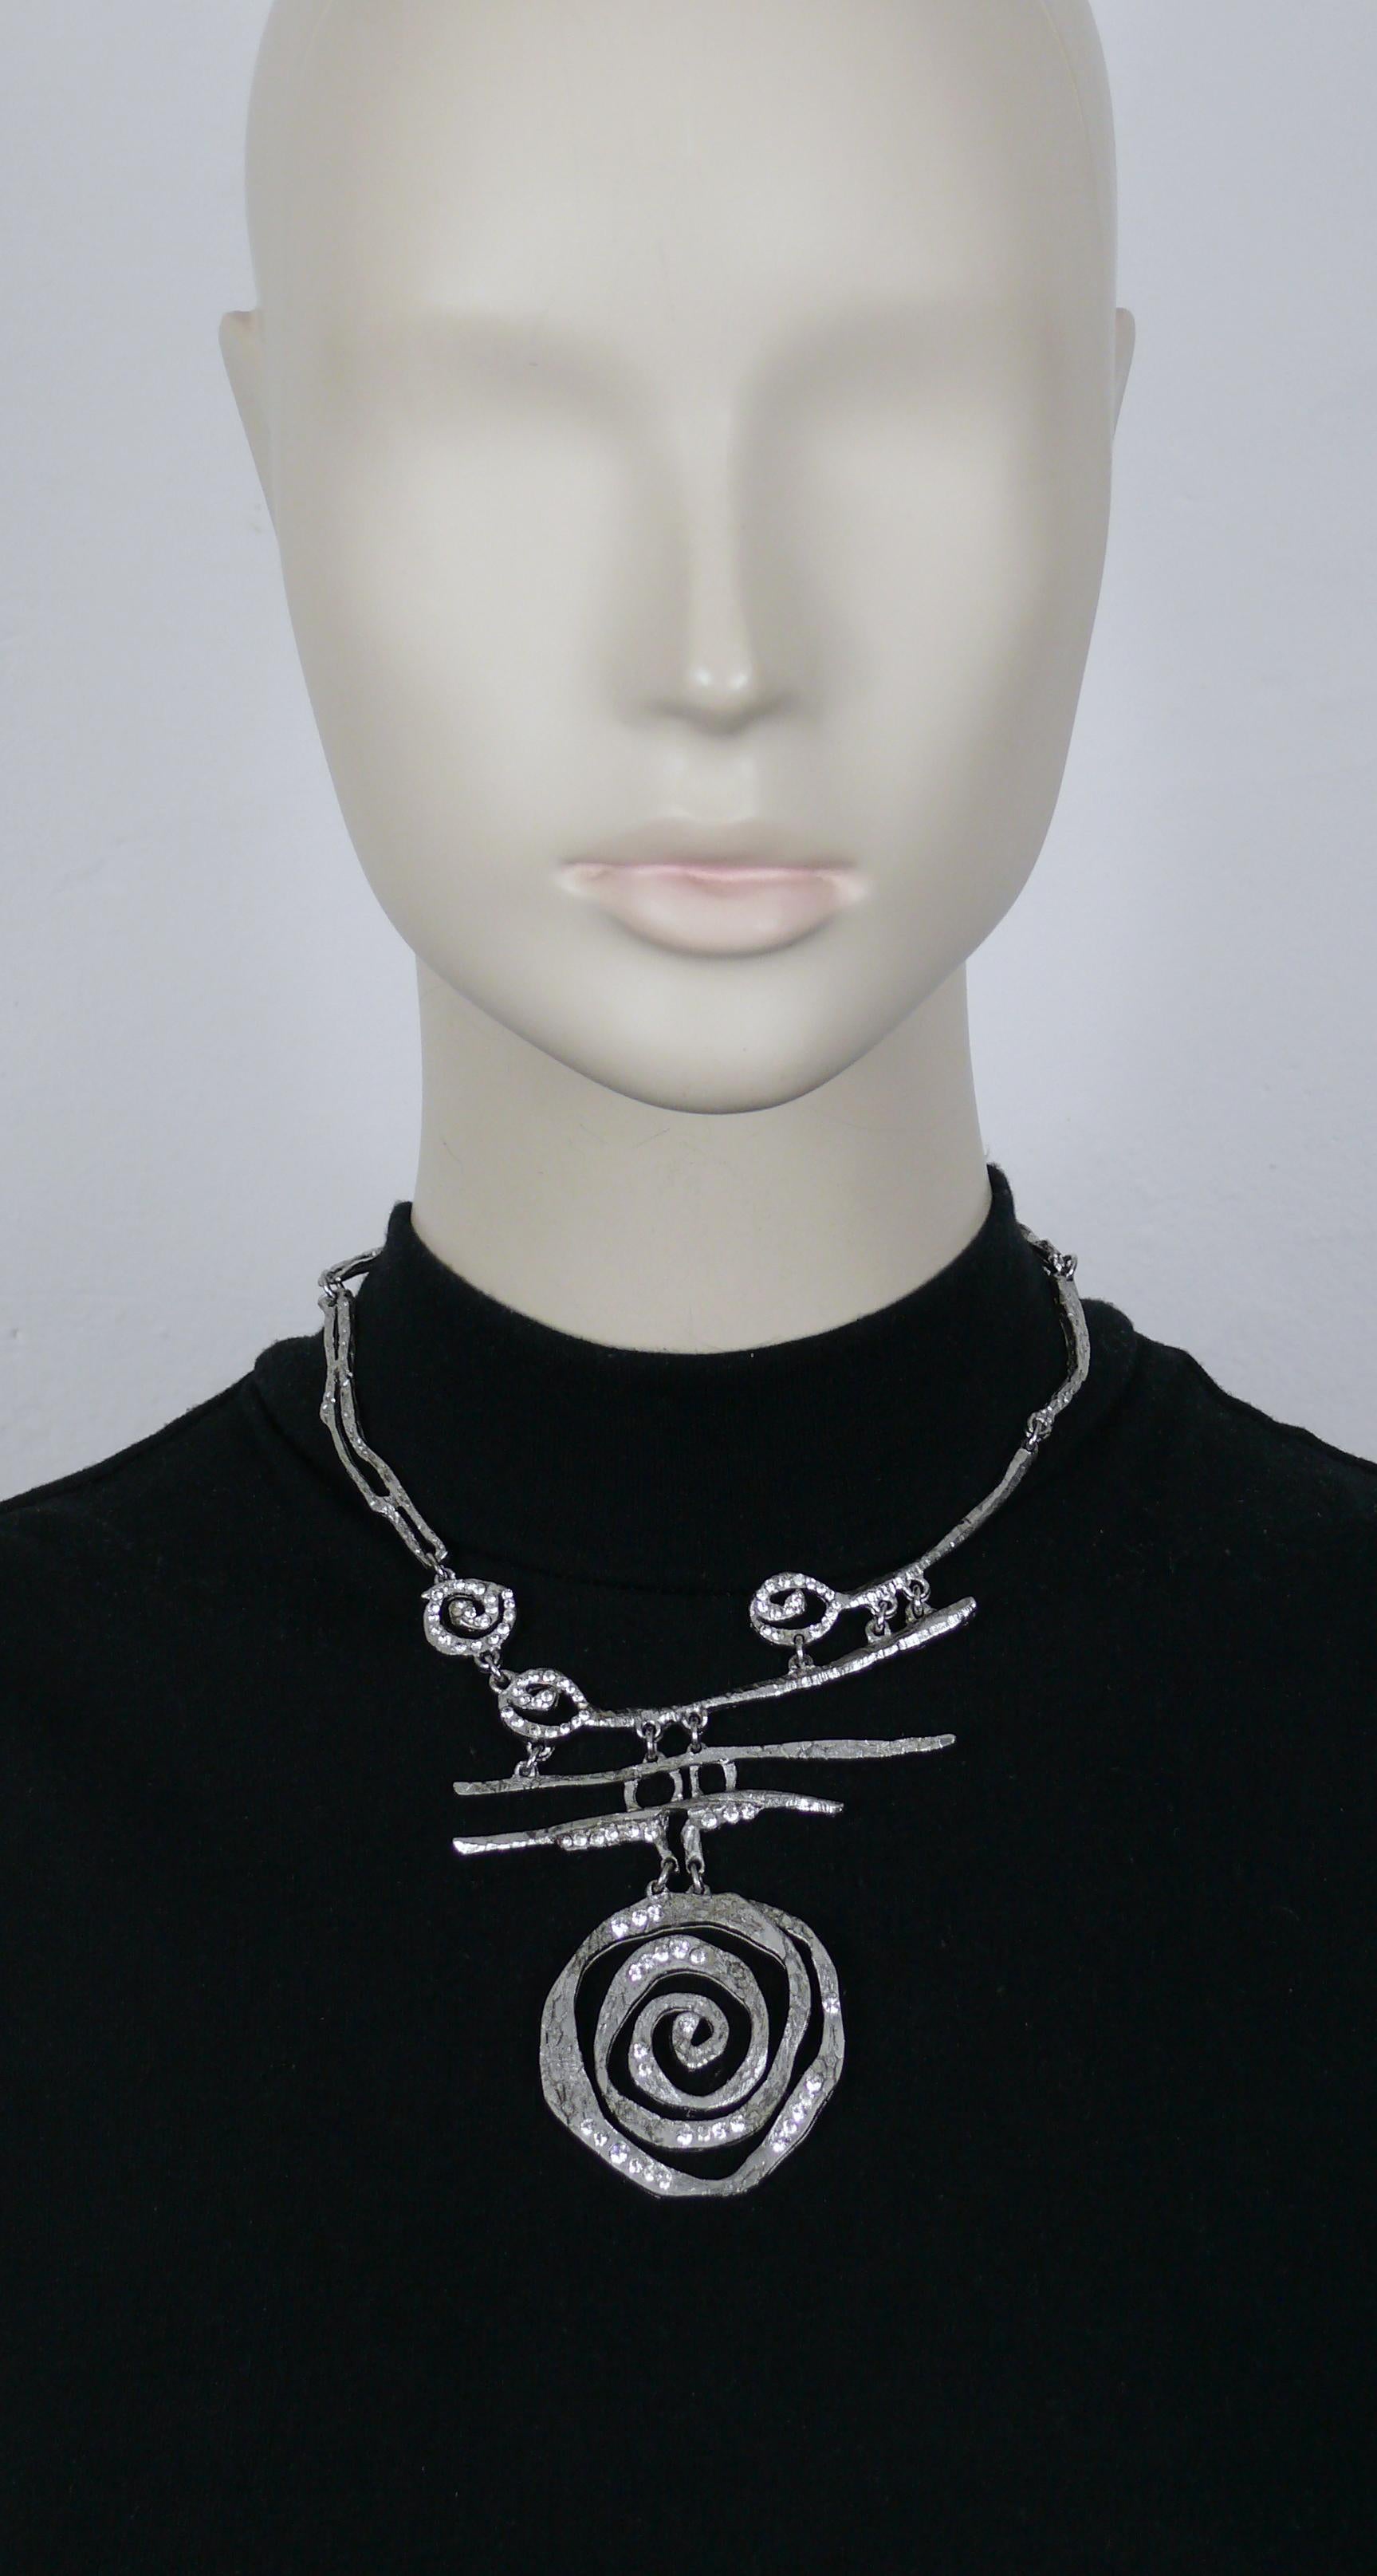 CHRISTIAN LACROIX vintage abstract silver tone necklace featuring a spiral pendant embellished with clear crystals.

Marked CHRISTIAN LACROIX CL Made in France.

Indicative measurements : max. length approx. 41 cm (16.14 inches) / adjustable length